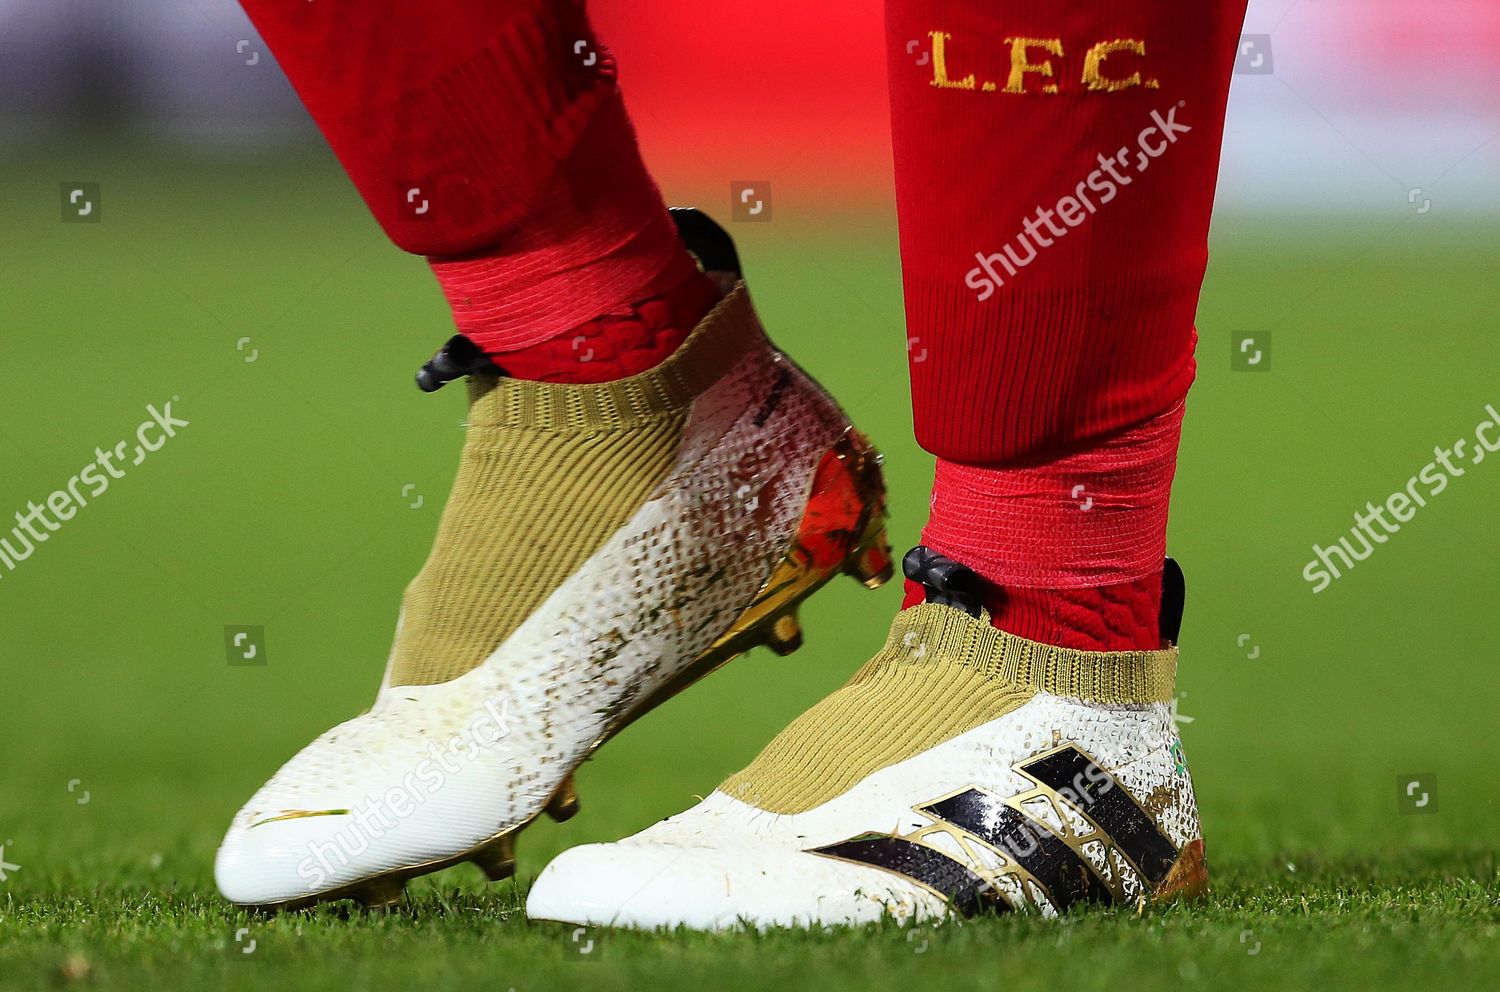 laceless Adidas football boots worn by Roberto Editorial Stock Photo -  Stock Image | Shutterstock